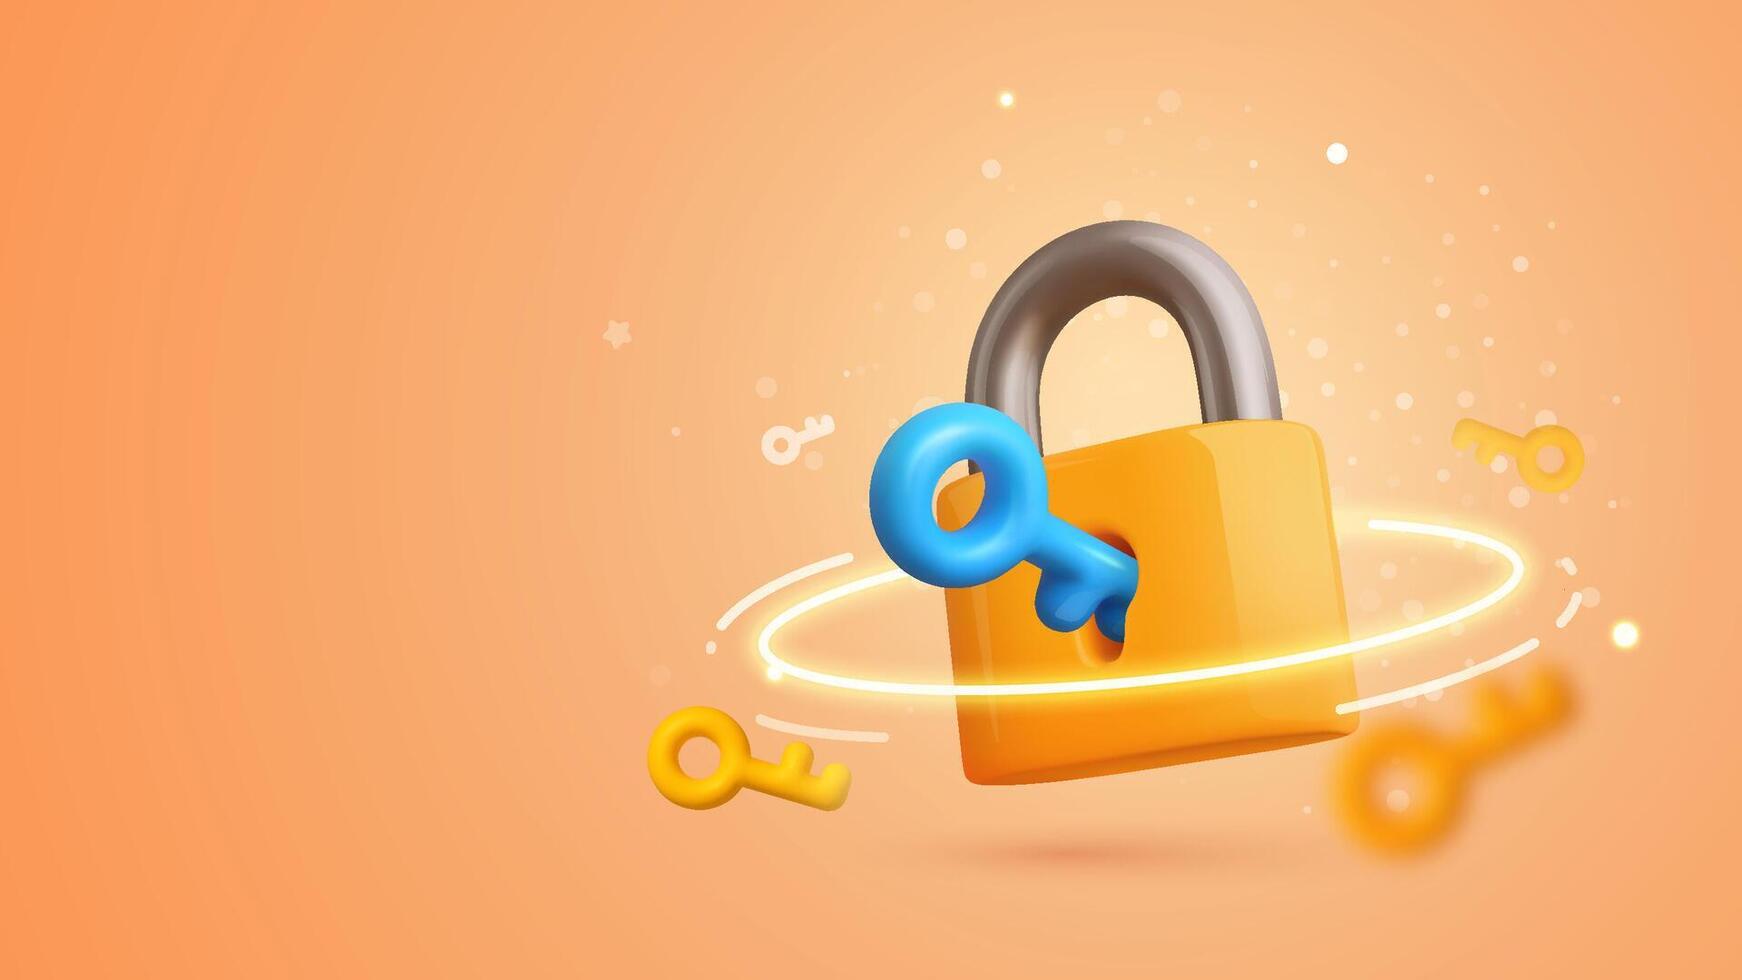 Safety, encryption, protection, privacy, data access. Yellow padlock with keyhole and blue key 3d cartoon vector illustration on orange background with light effects.